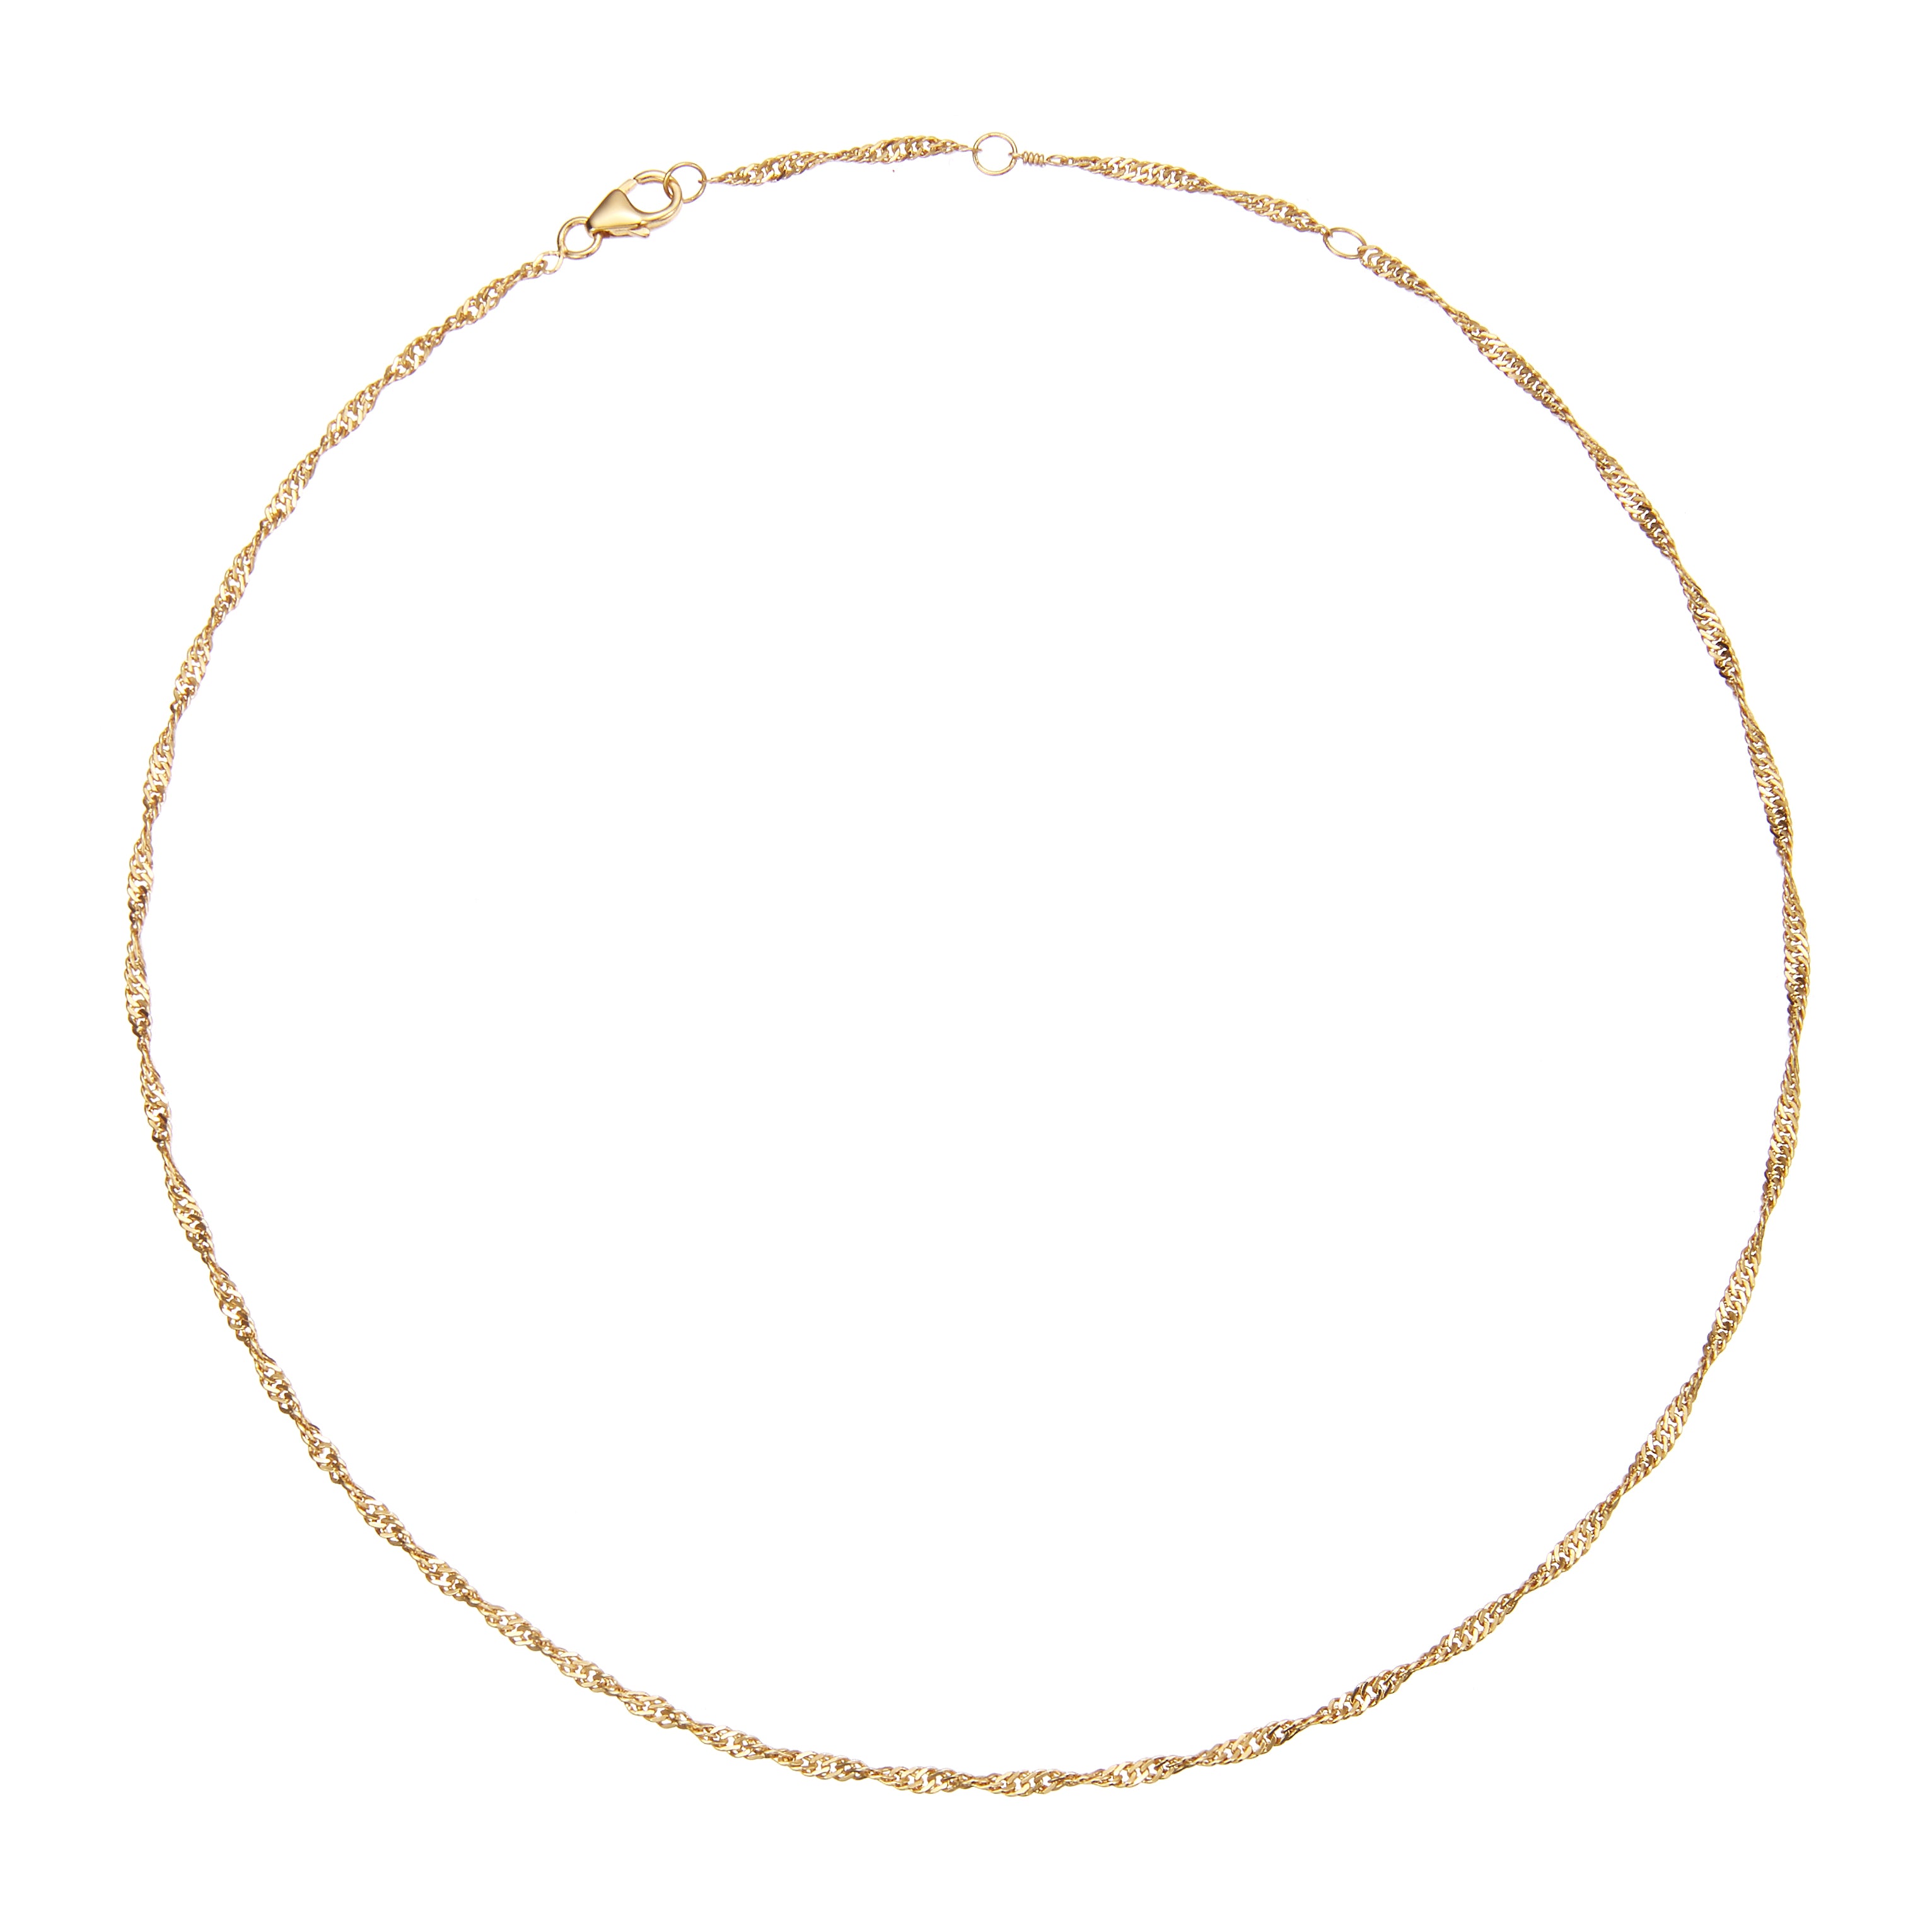 Gold twisted rope chain necklace on a white background